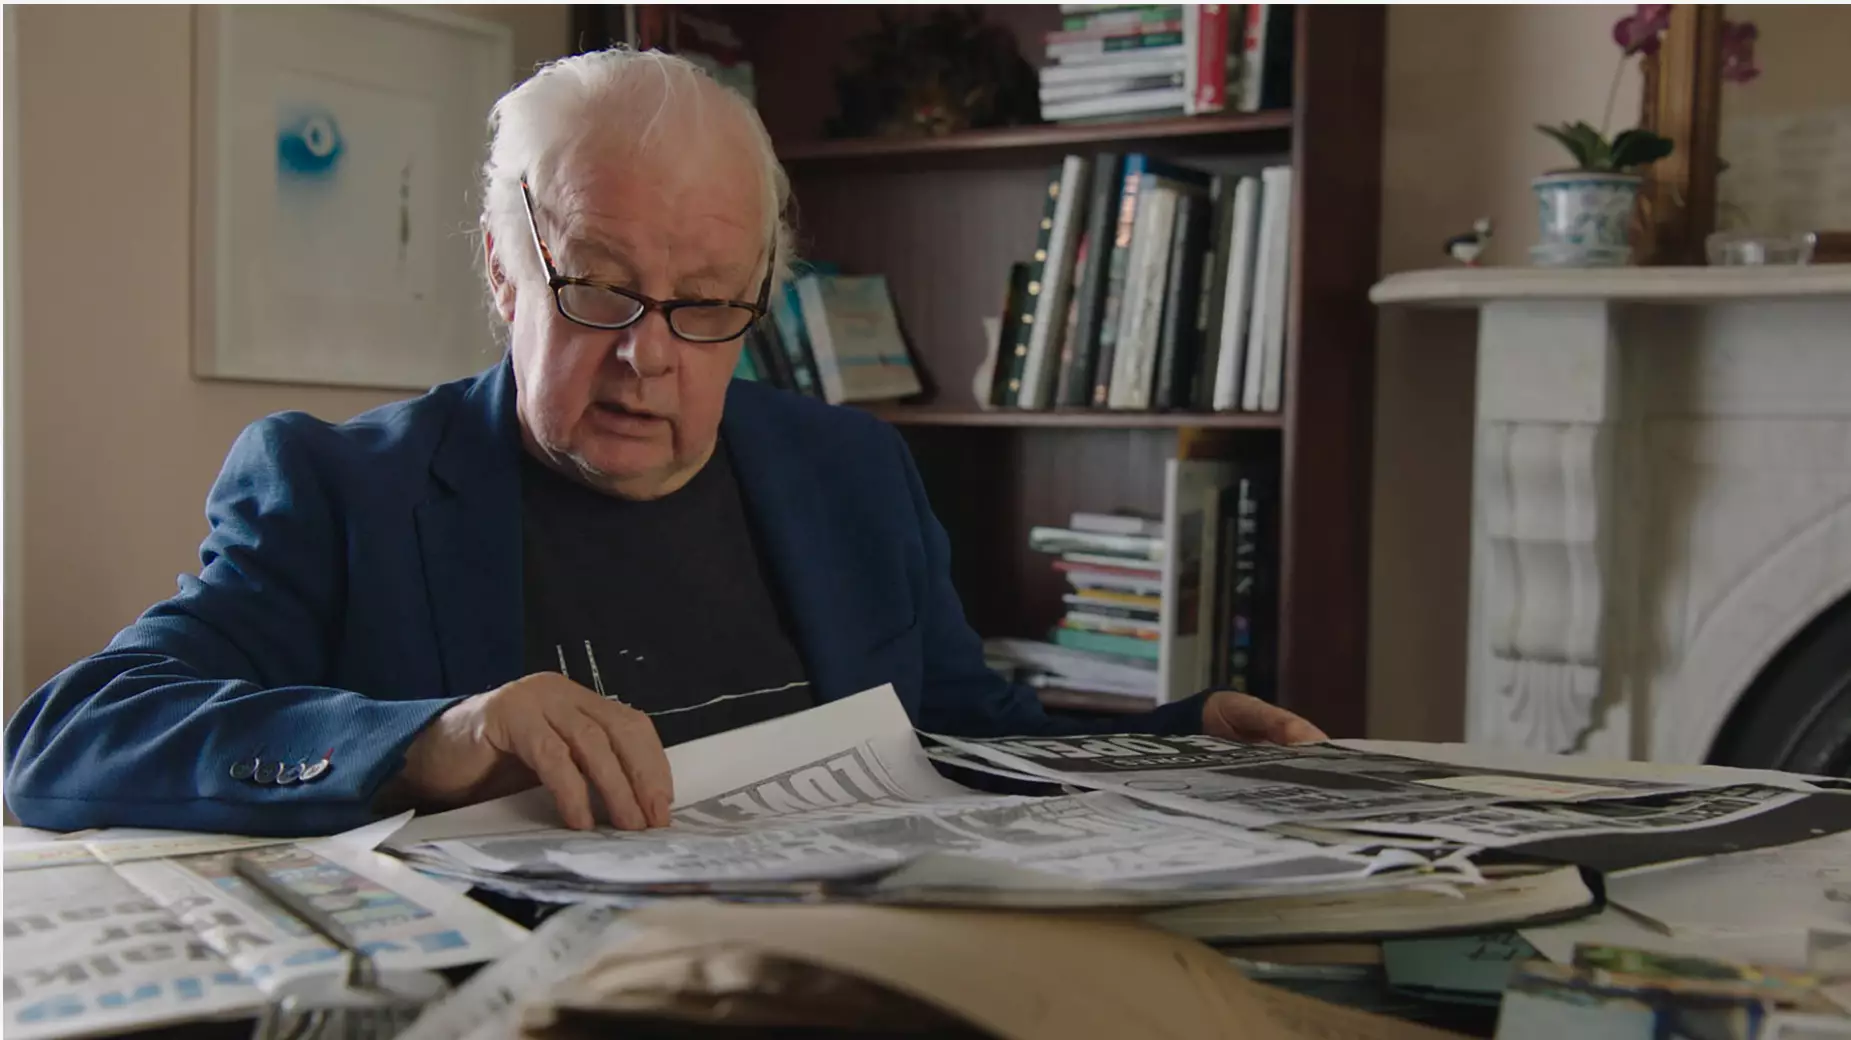 Six-time Oscar nominee Jim Sheridan has directed the new documentary (